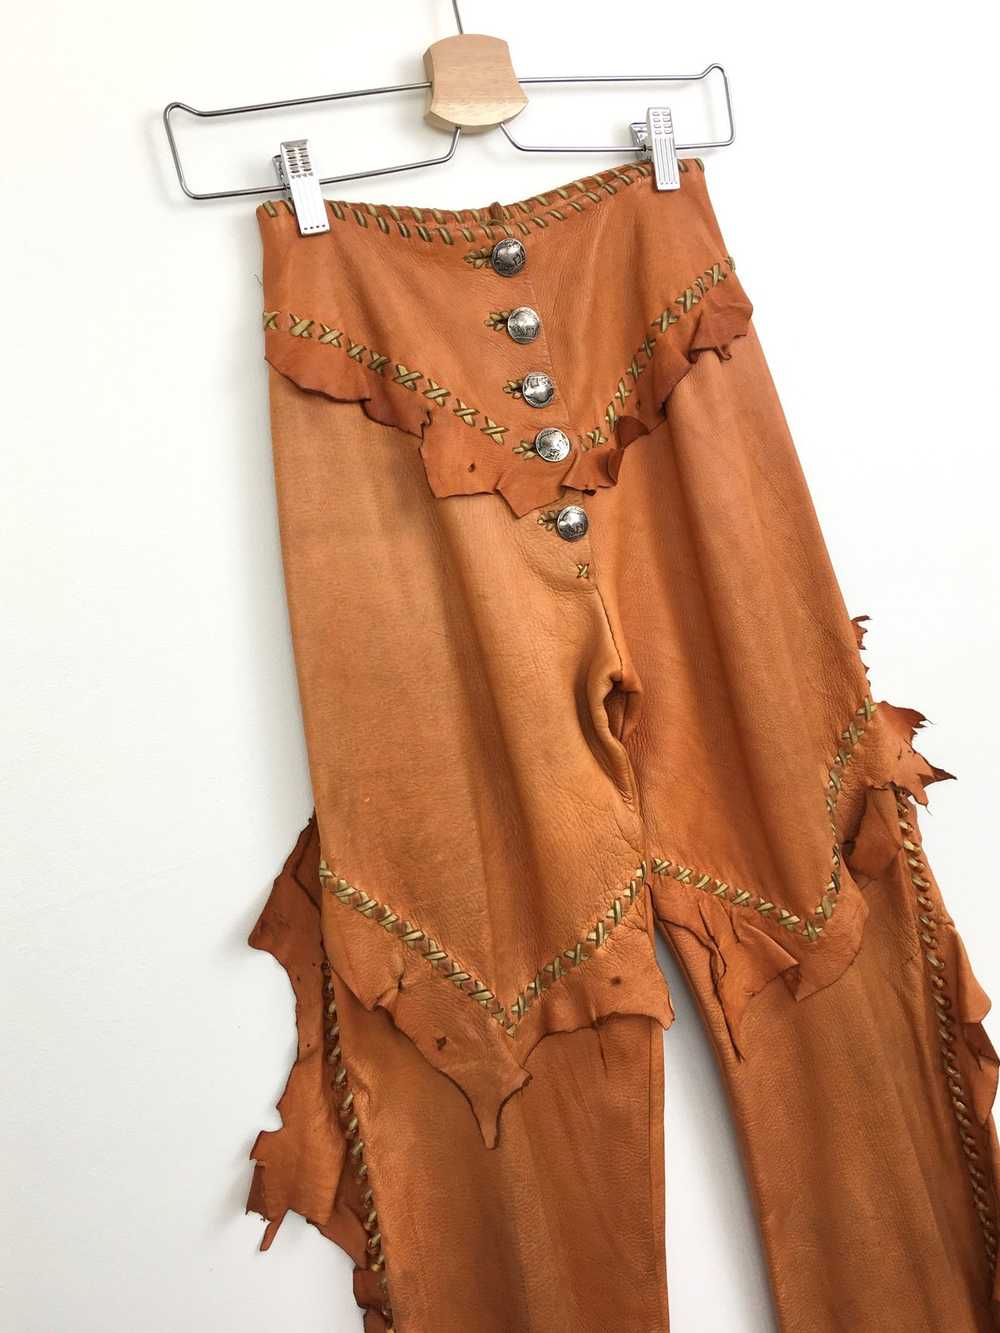 1970s Clifford Olson Artisan Made Leather Pants - image 2